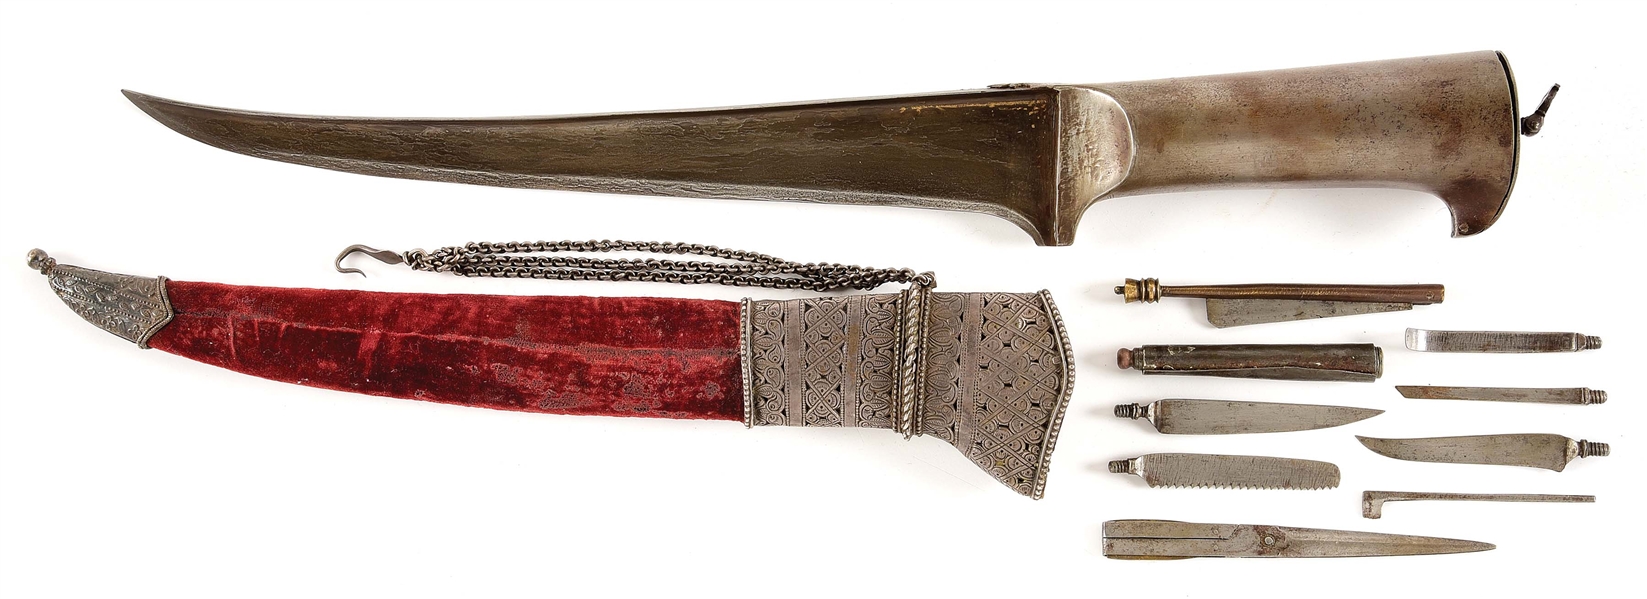 A VERY SCARCE INDO-PERSIAN SURGEON DAGGER WITH SURGICAL TOOLS IN HILT